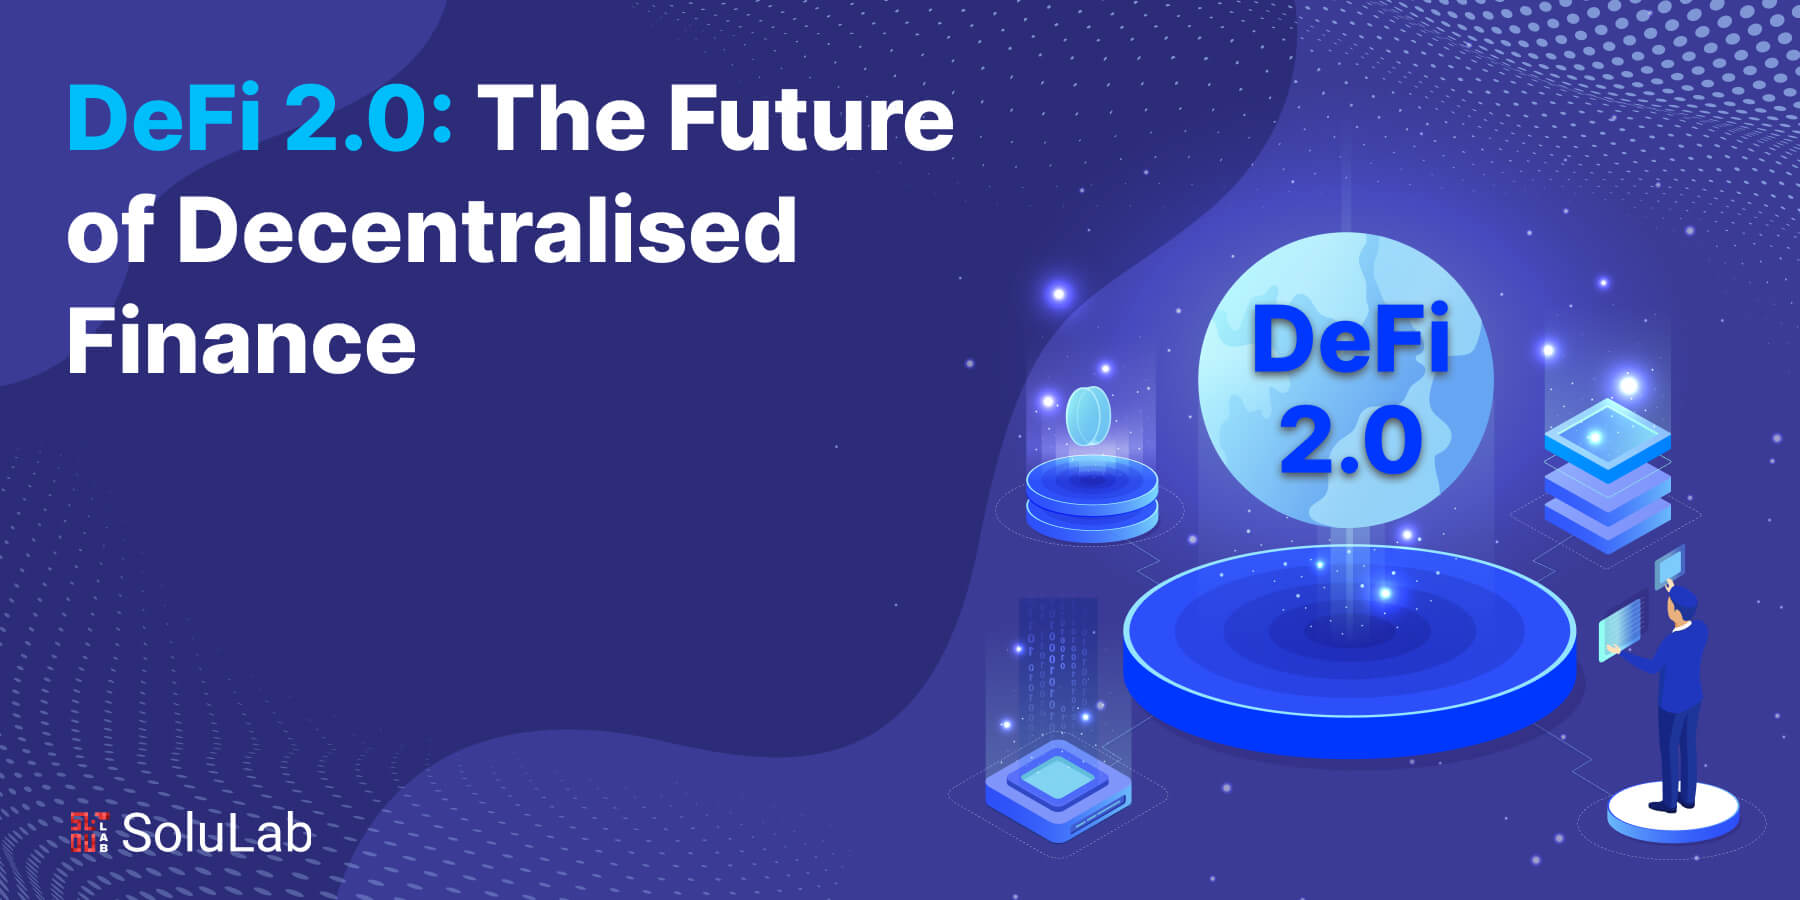 DeFi 2.0: The Future of Decentralised Finance